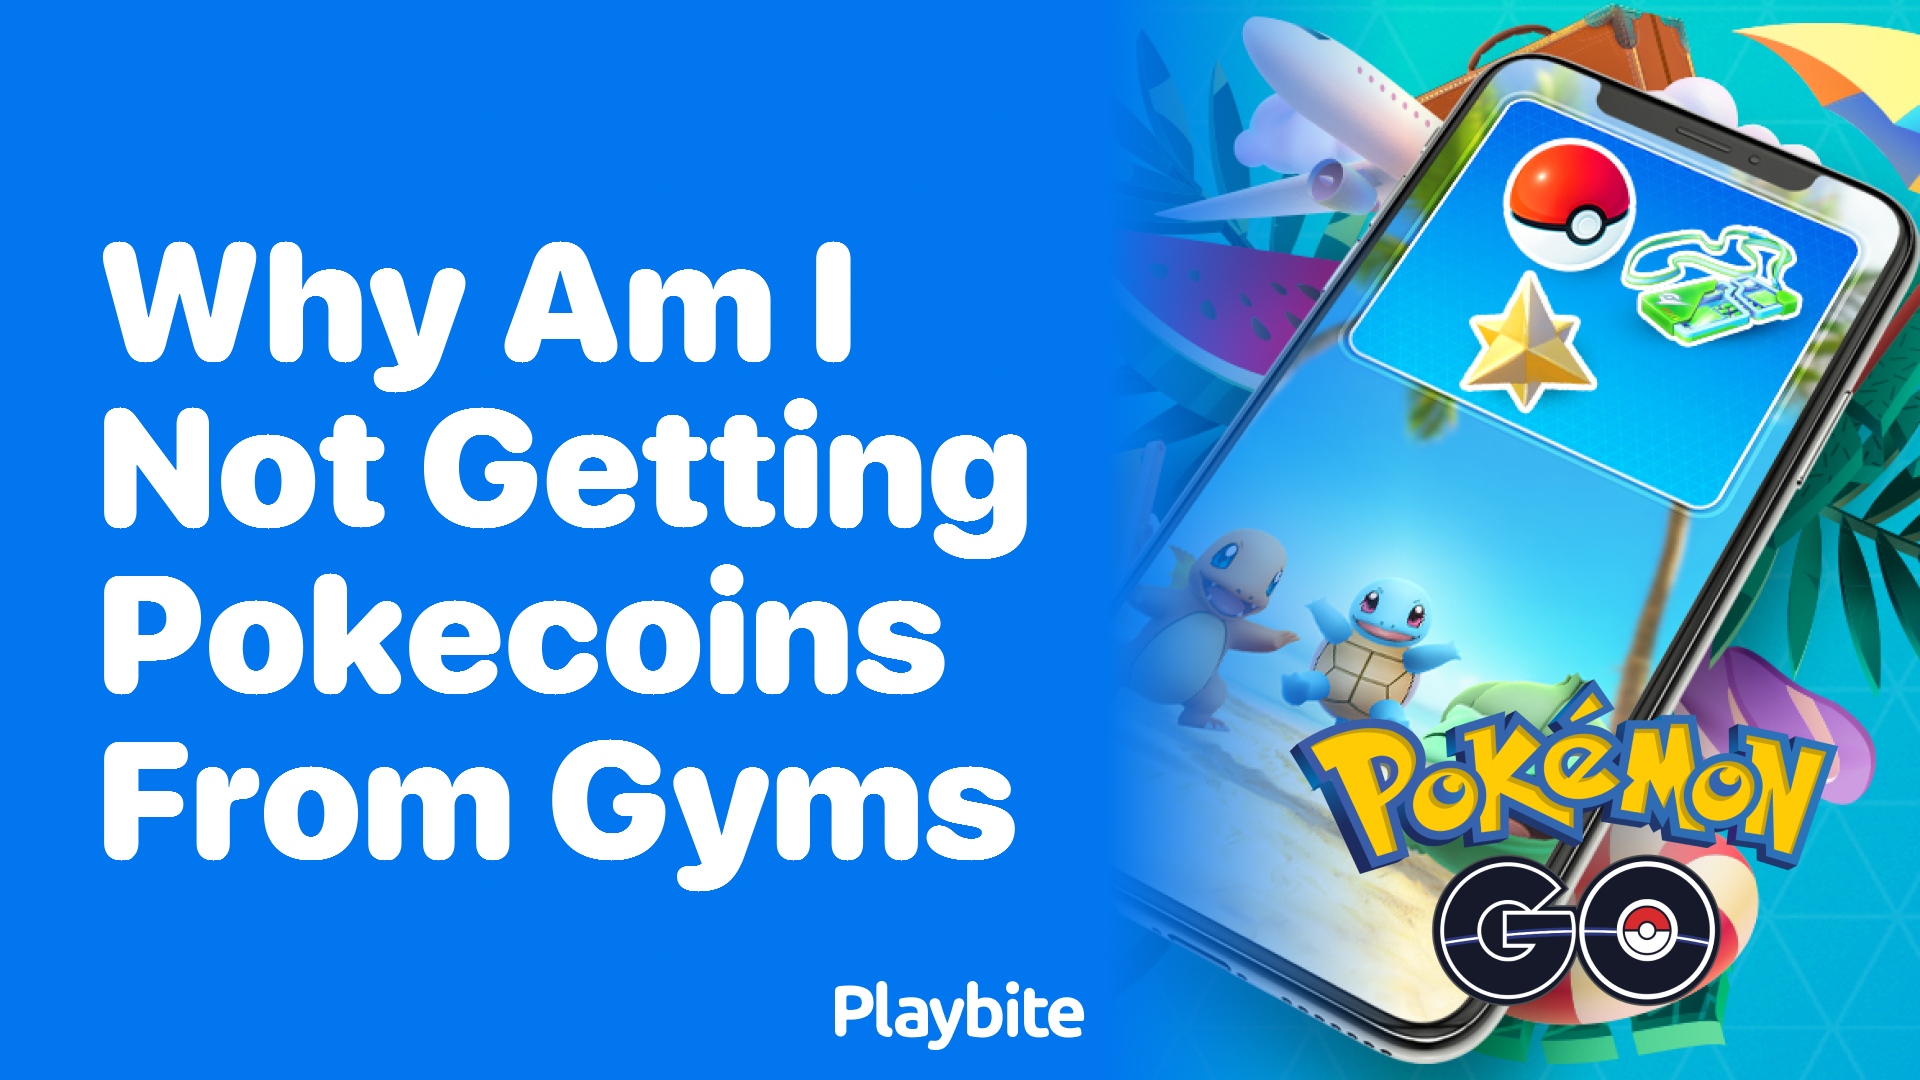 Why Am I Not Getting PokeCoins from Gyms in Pokemon GO?